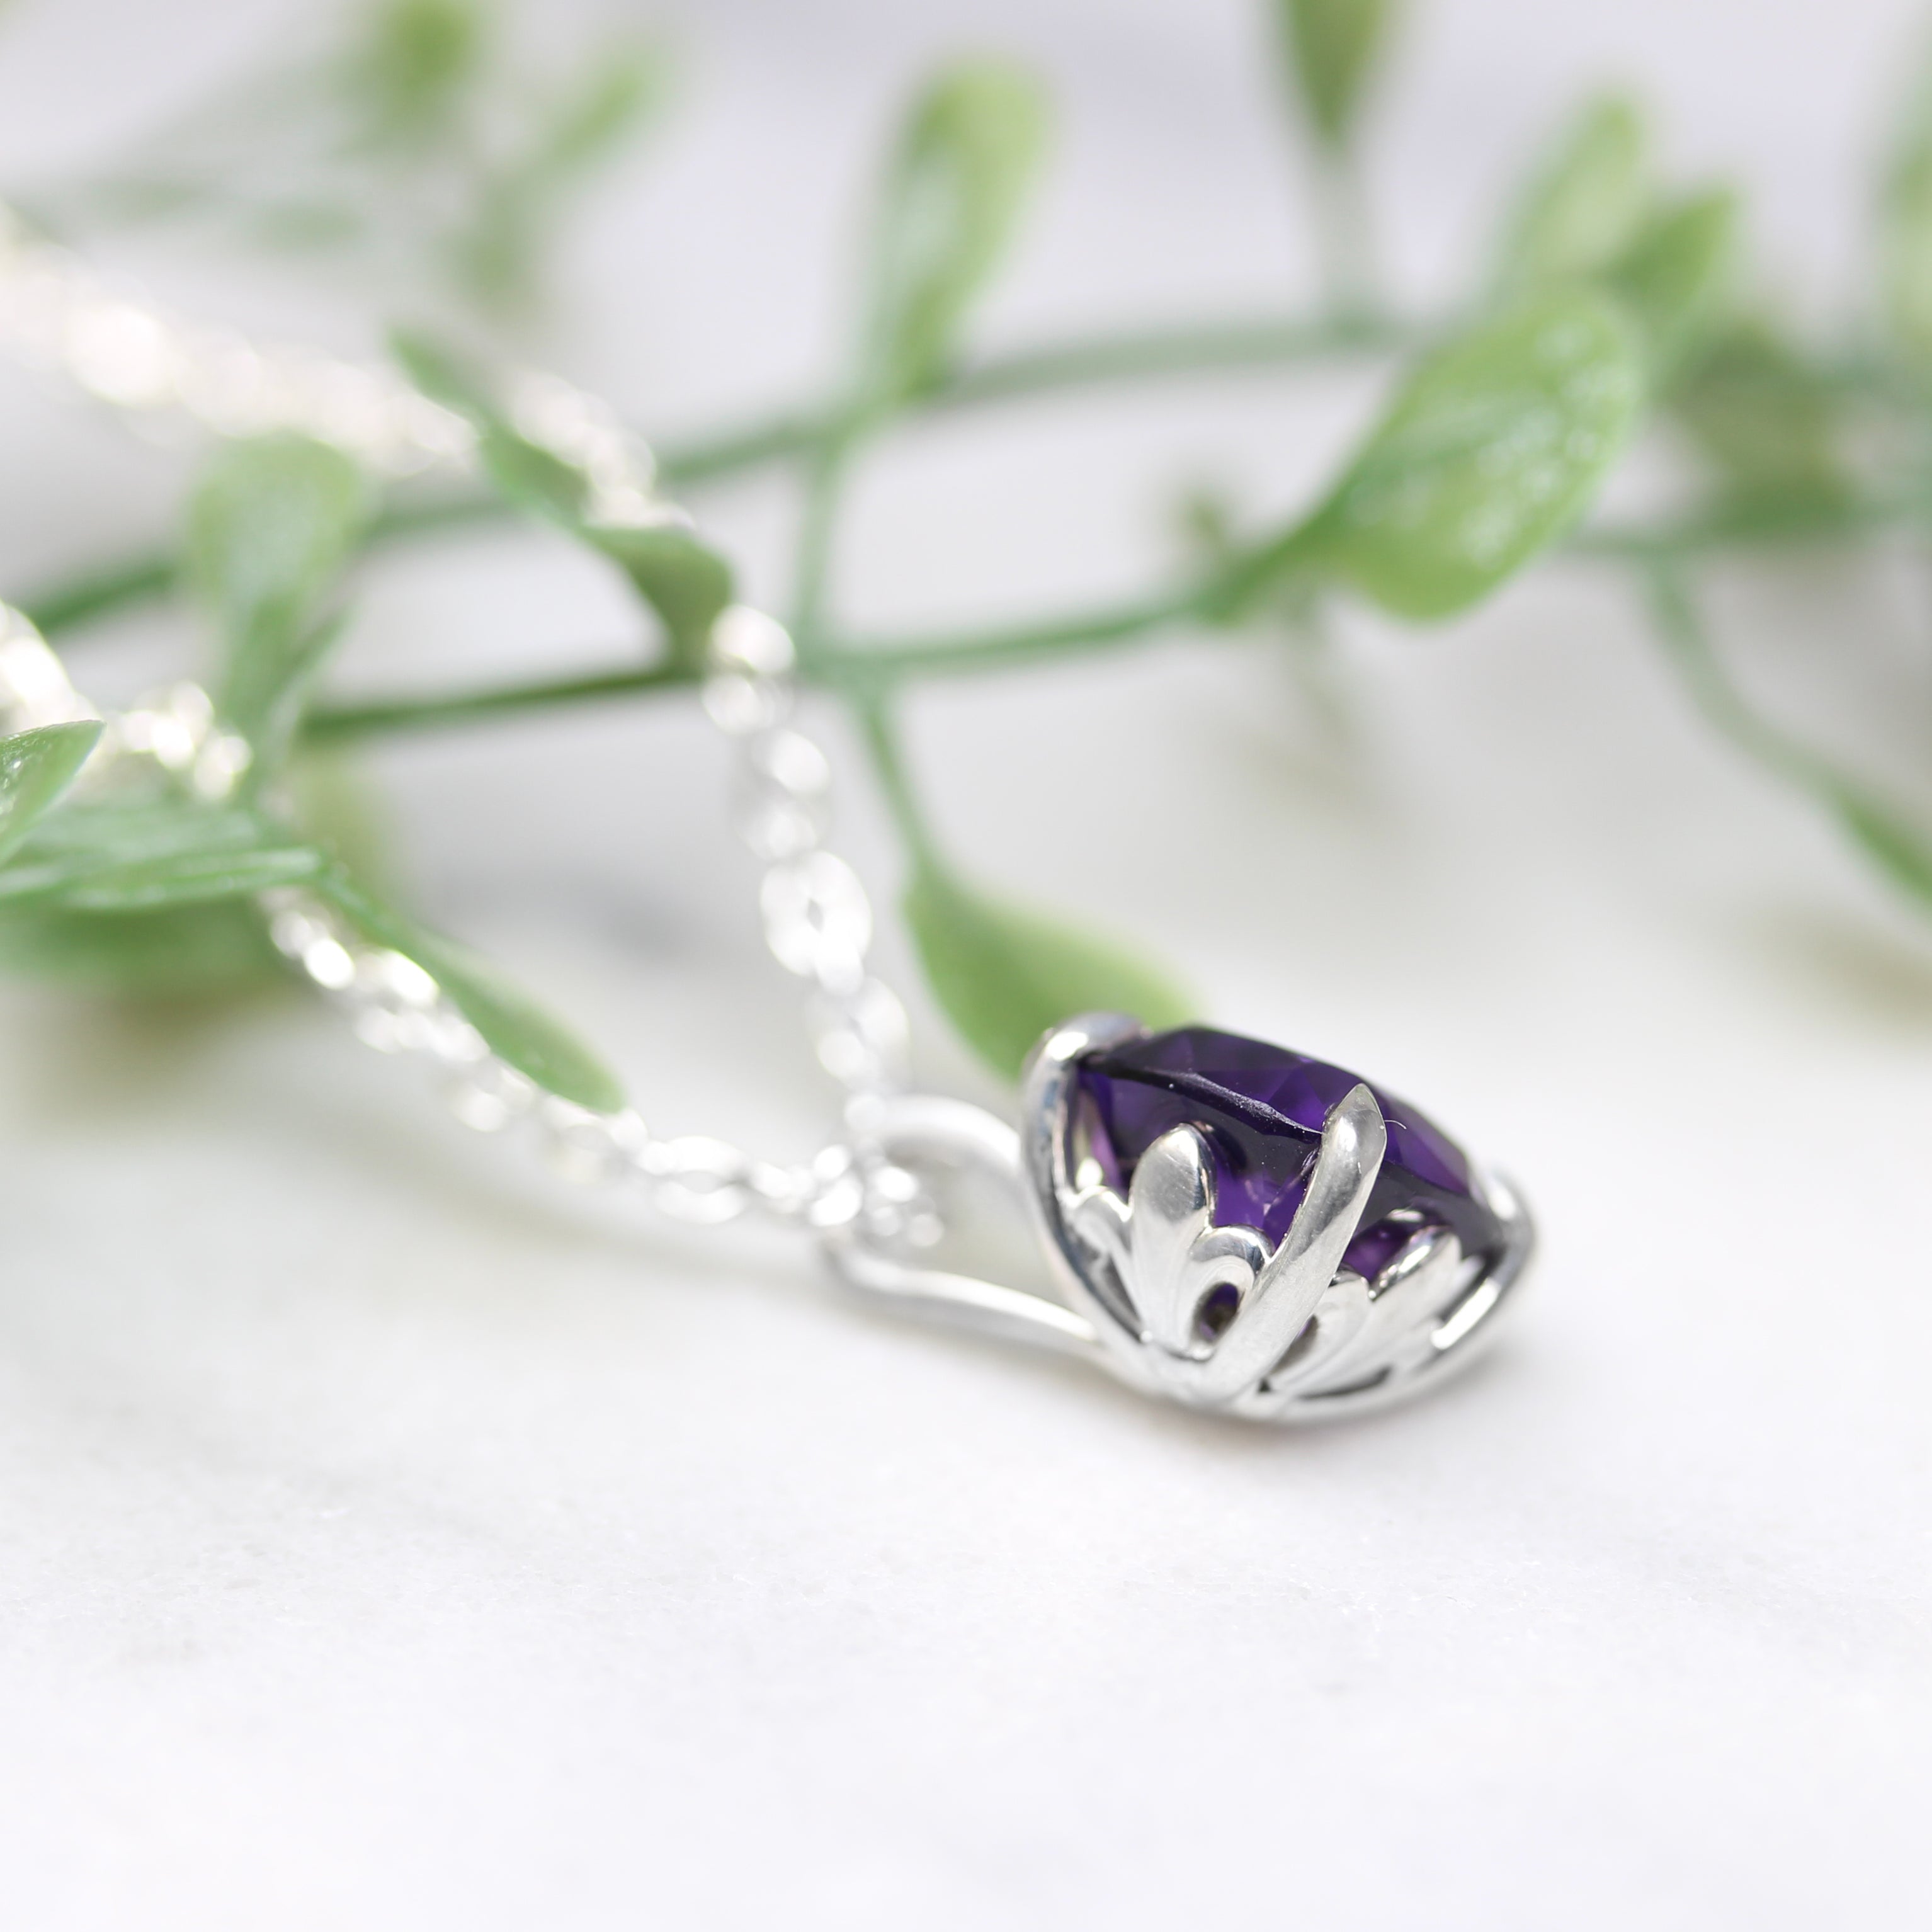 amethyst silver pendant back angled view with greenery